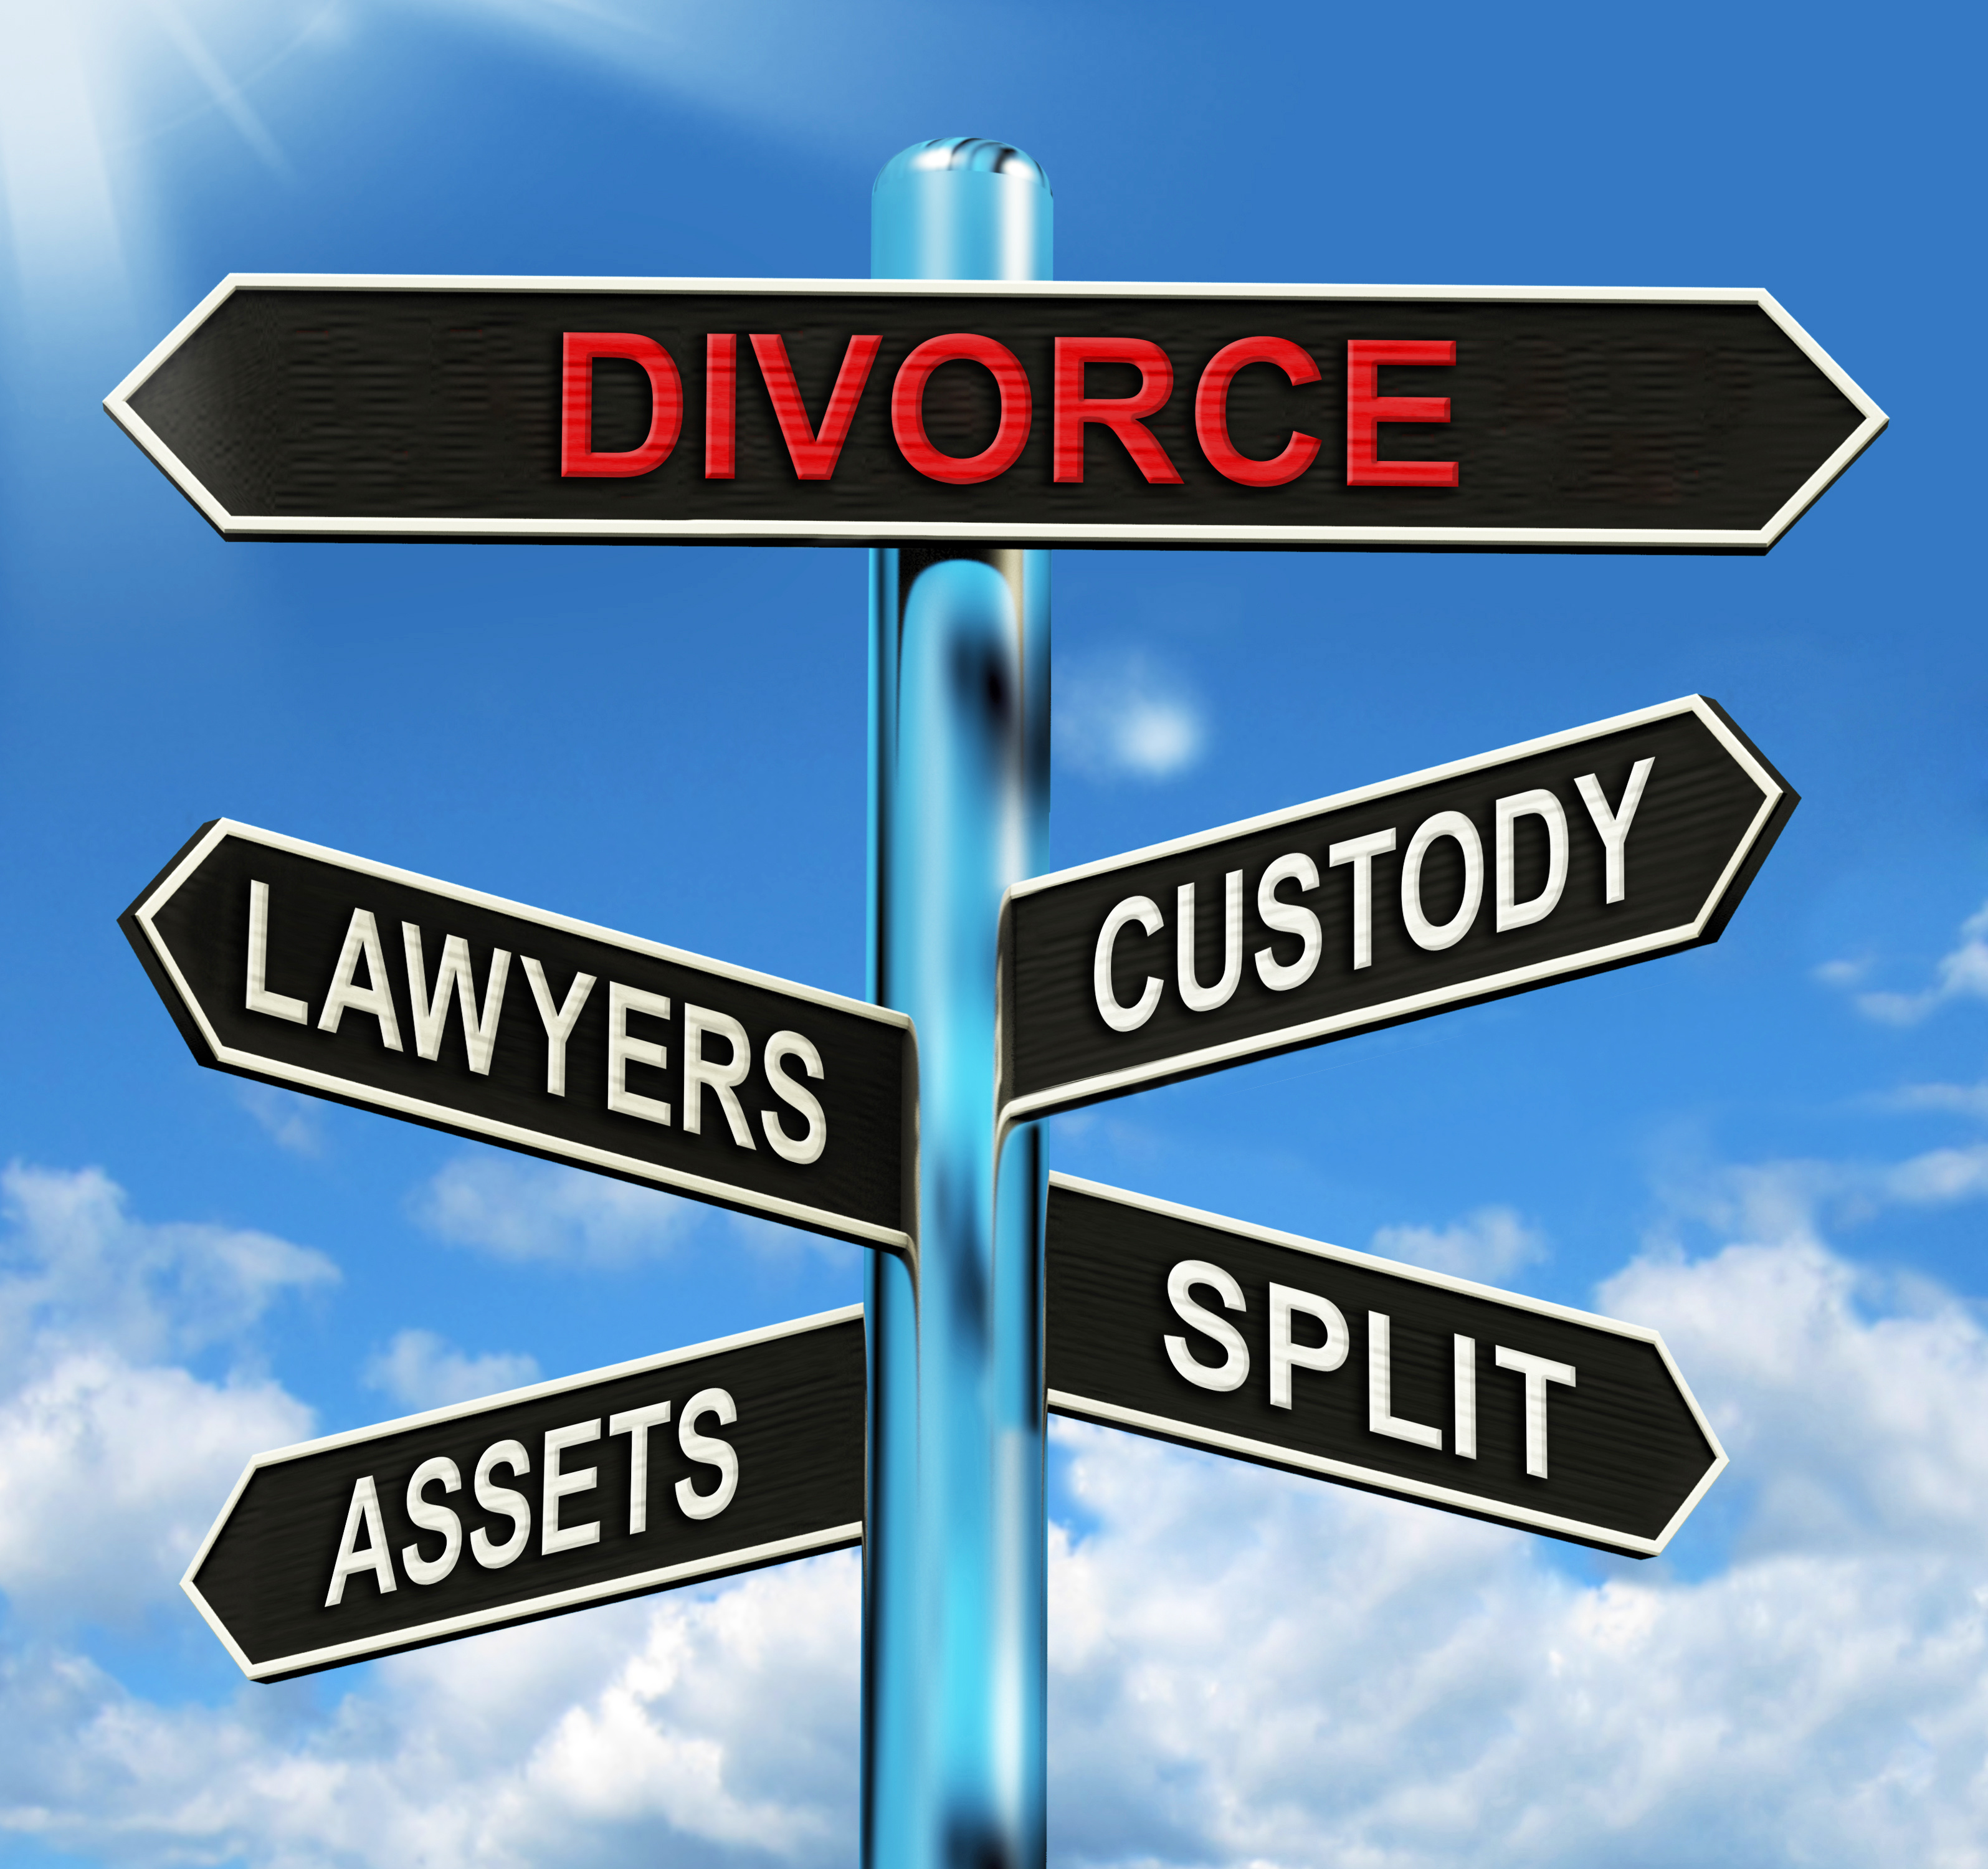 Don’t I need a legal separation before the divorce?